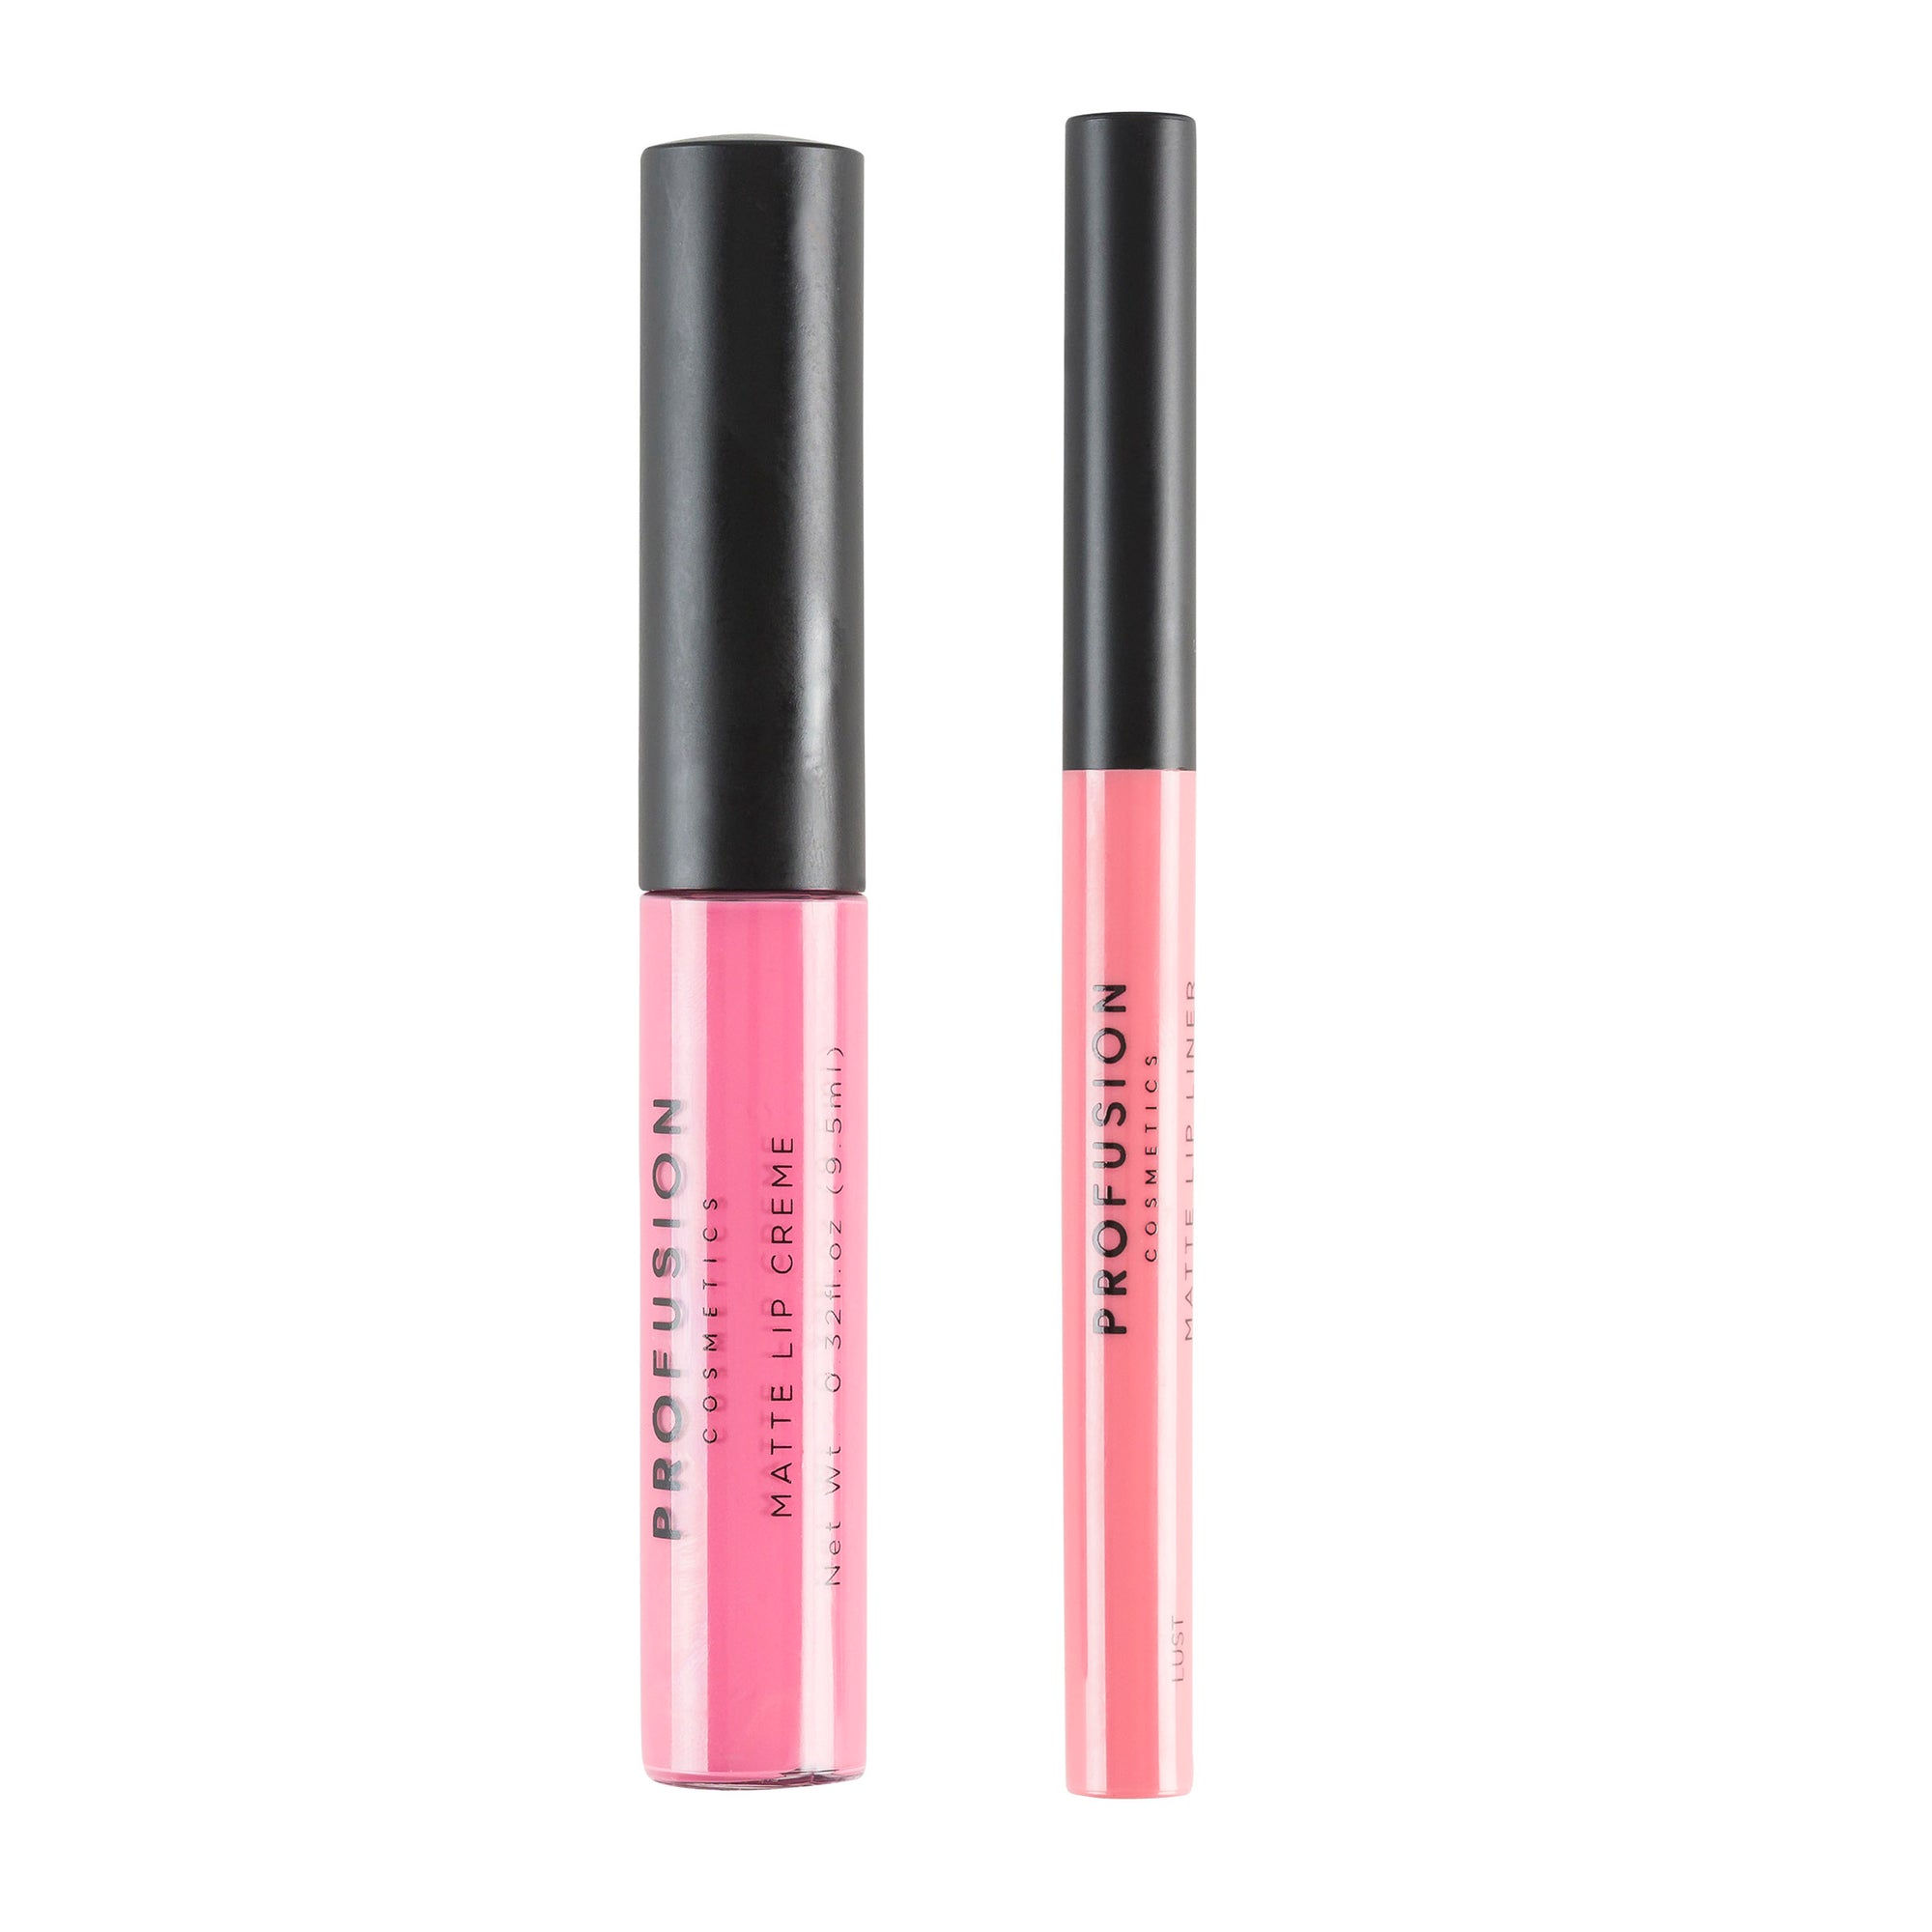 AVON Color Trend Lipgloss Review - Beauty Bulletin - Lipgloss